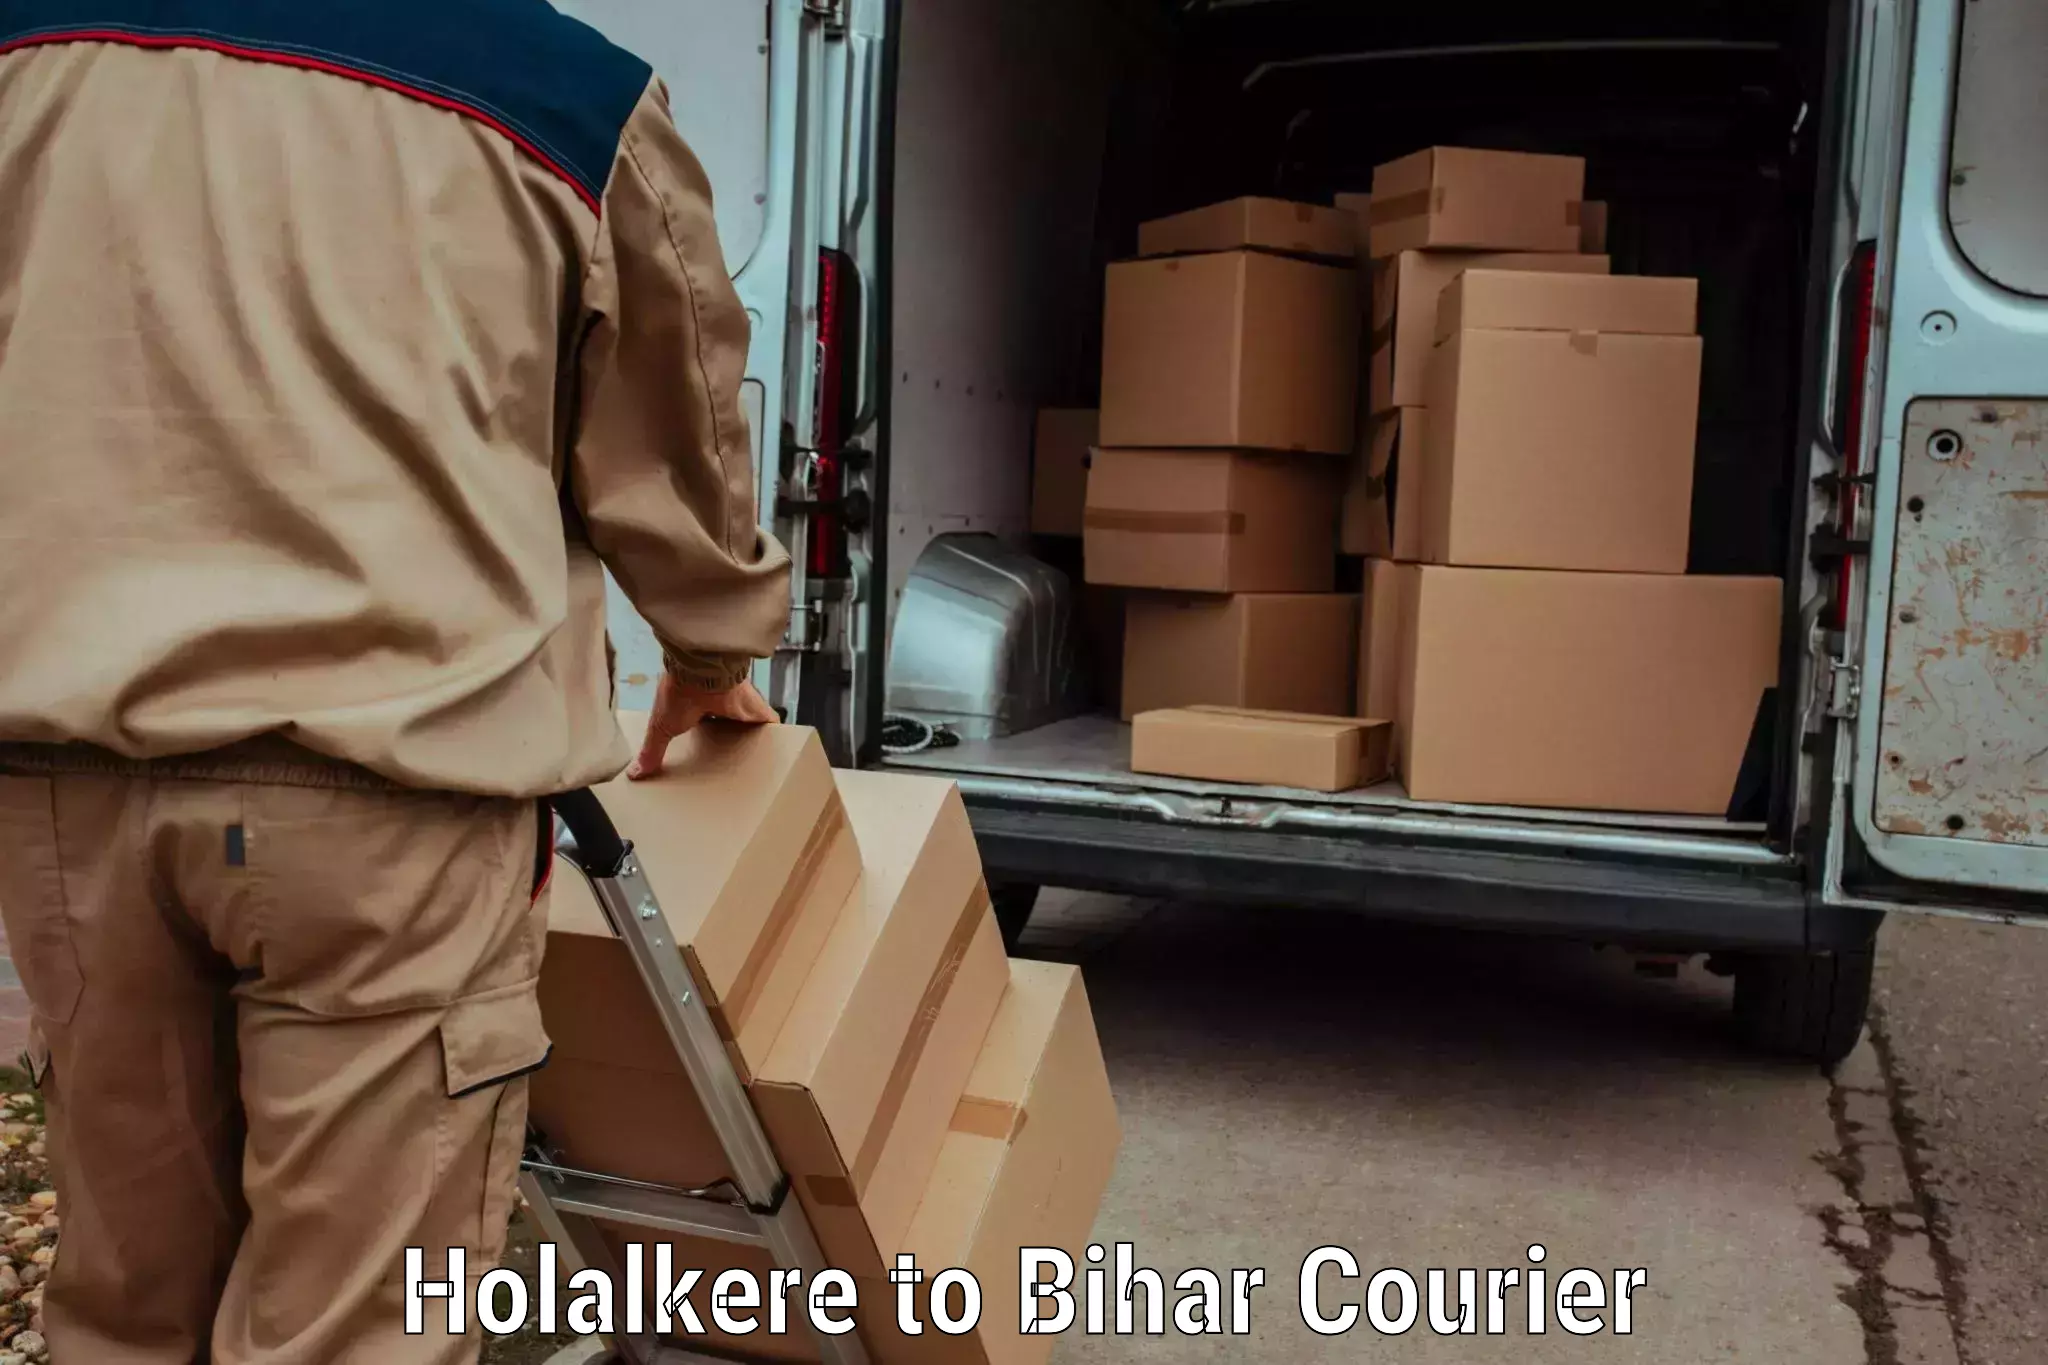 State-of-the-art courier technology Holalkere to Kamtaul